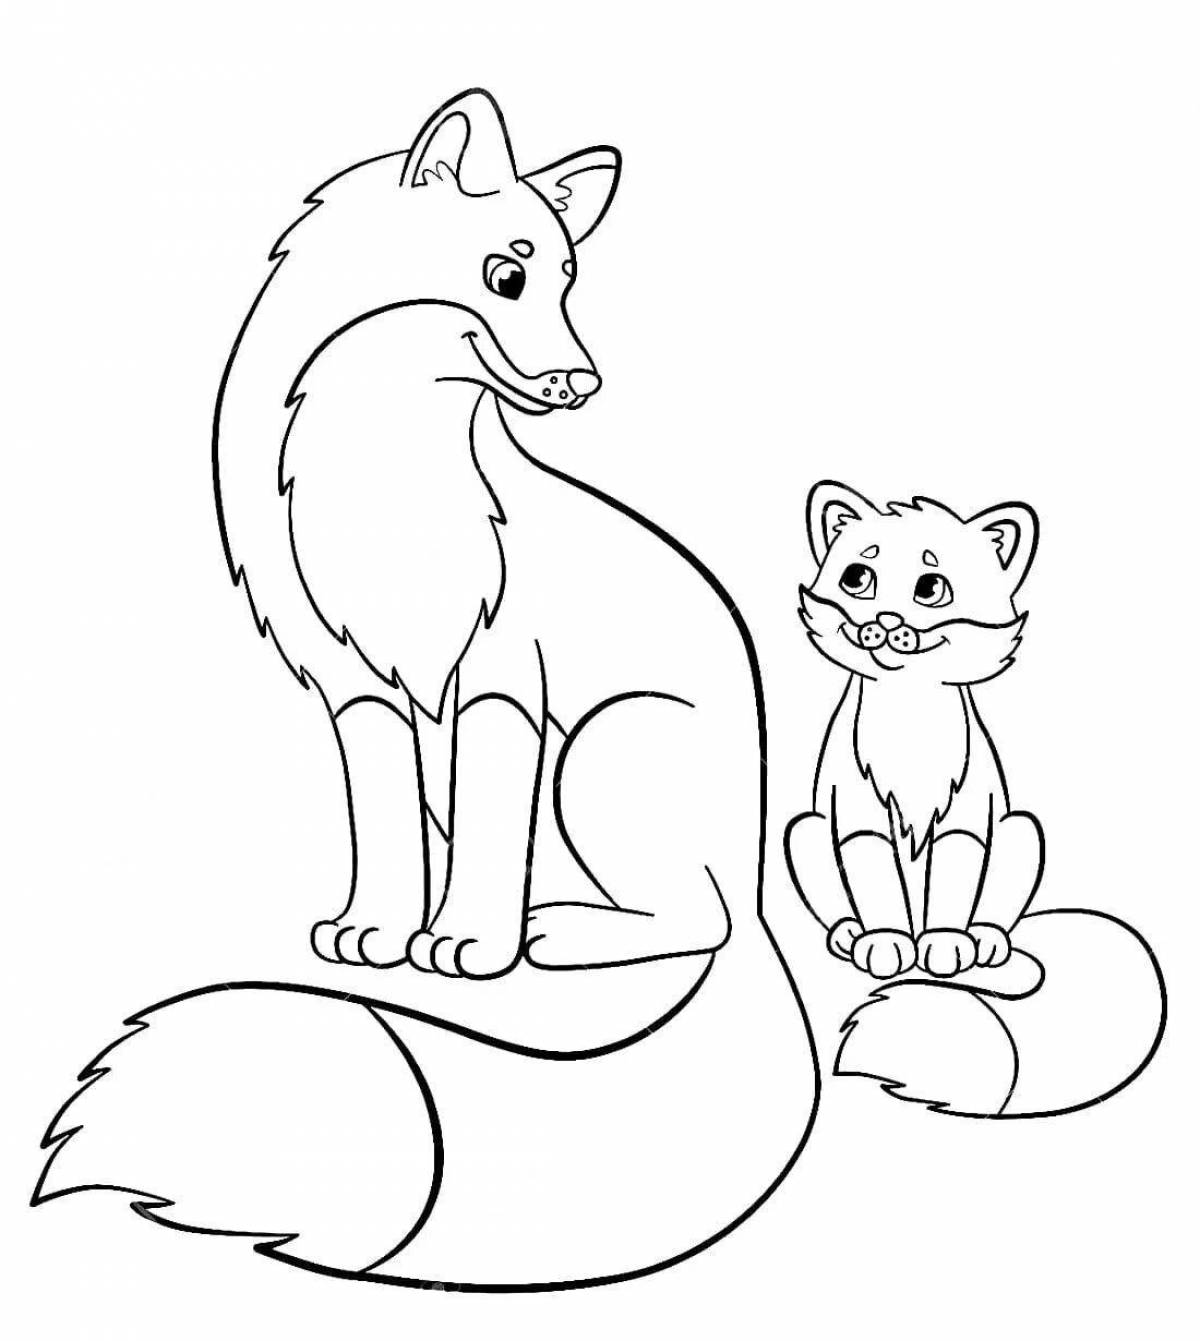 Mysterious cunning fox coloring book